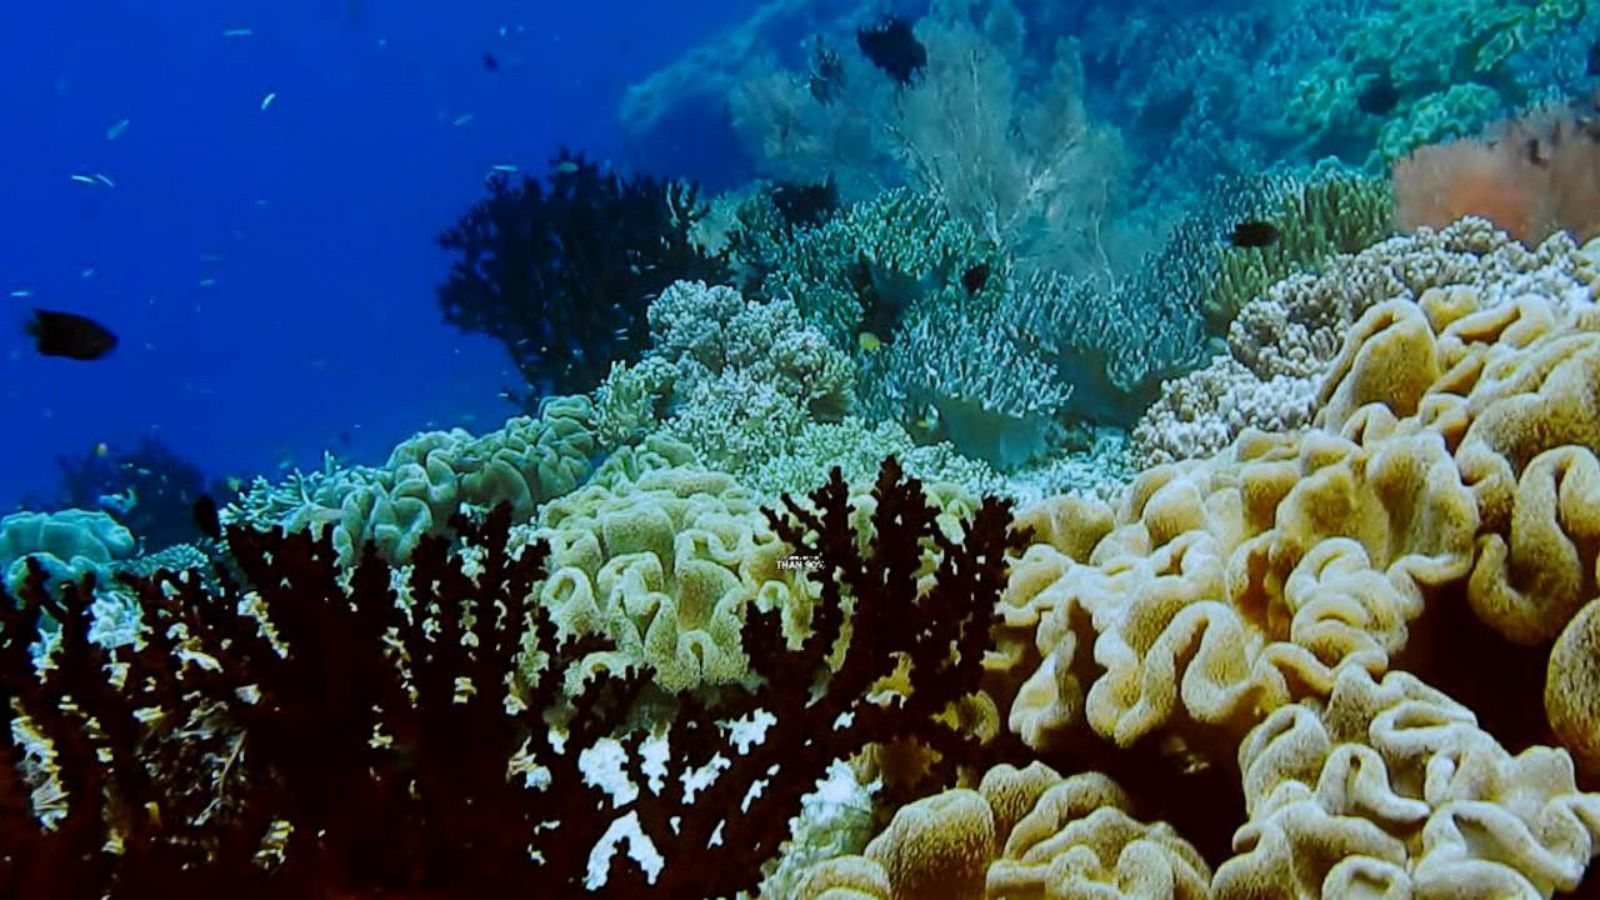 Life-sustaining coral reefs suffer in warming water - Good Morning America